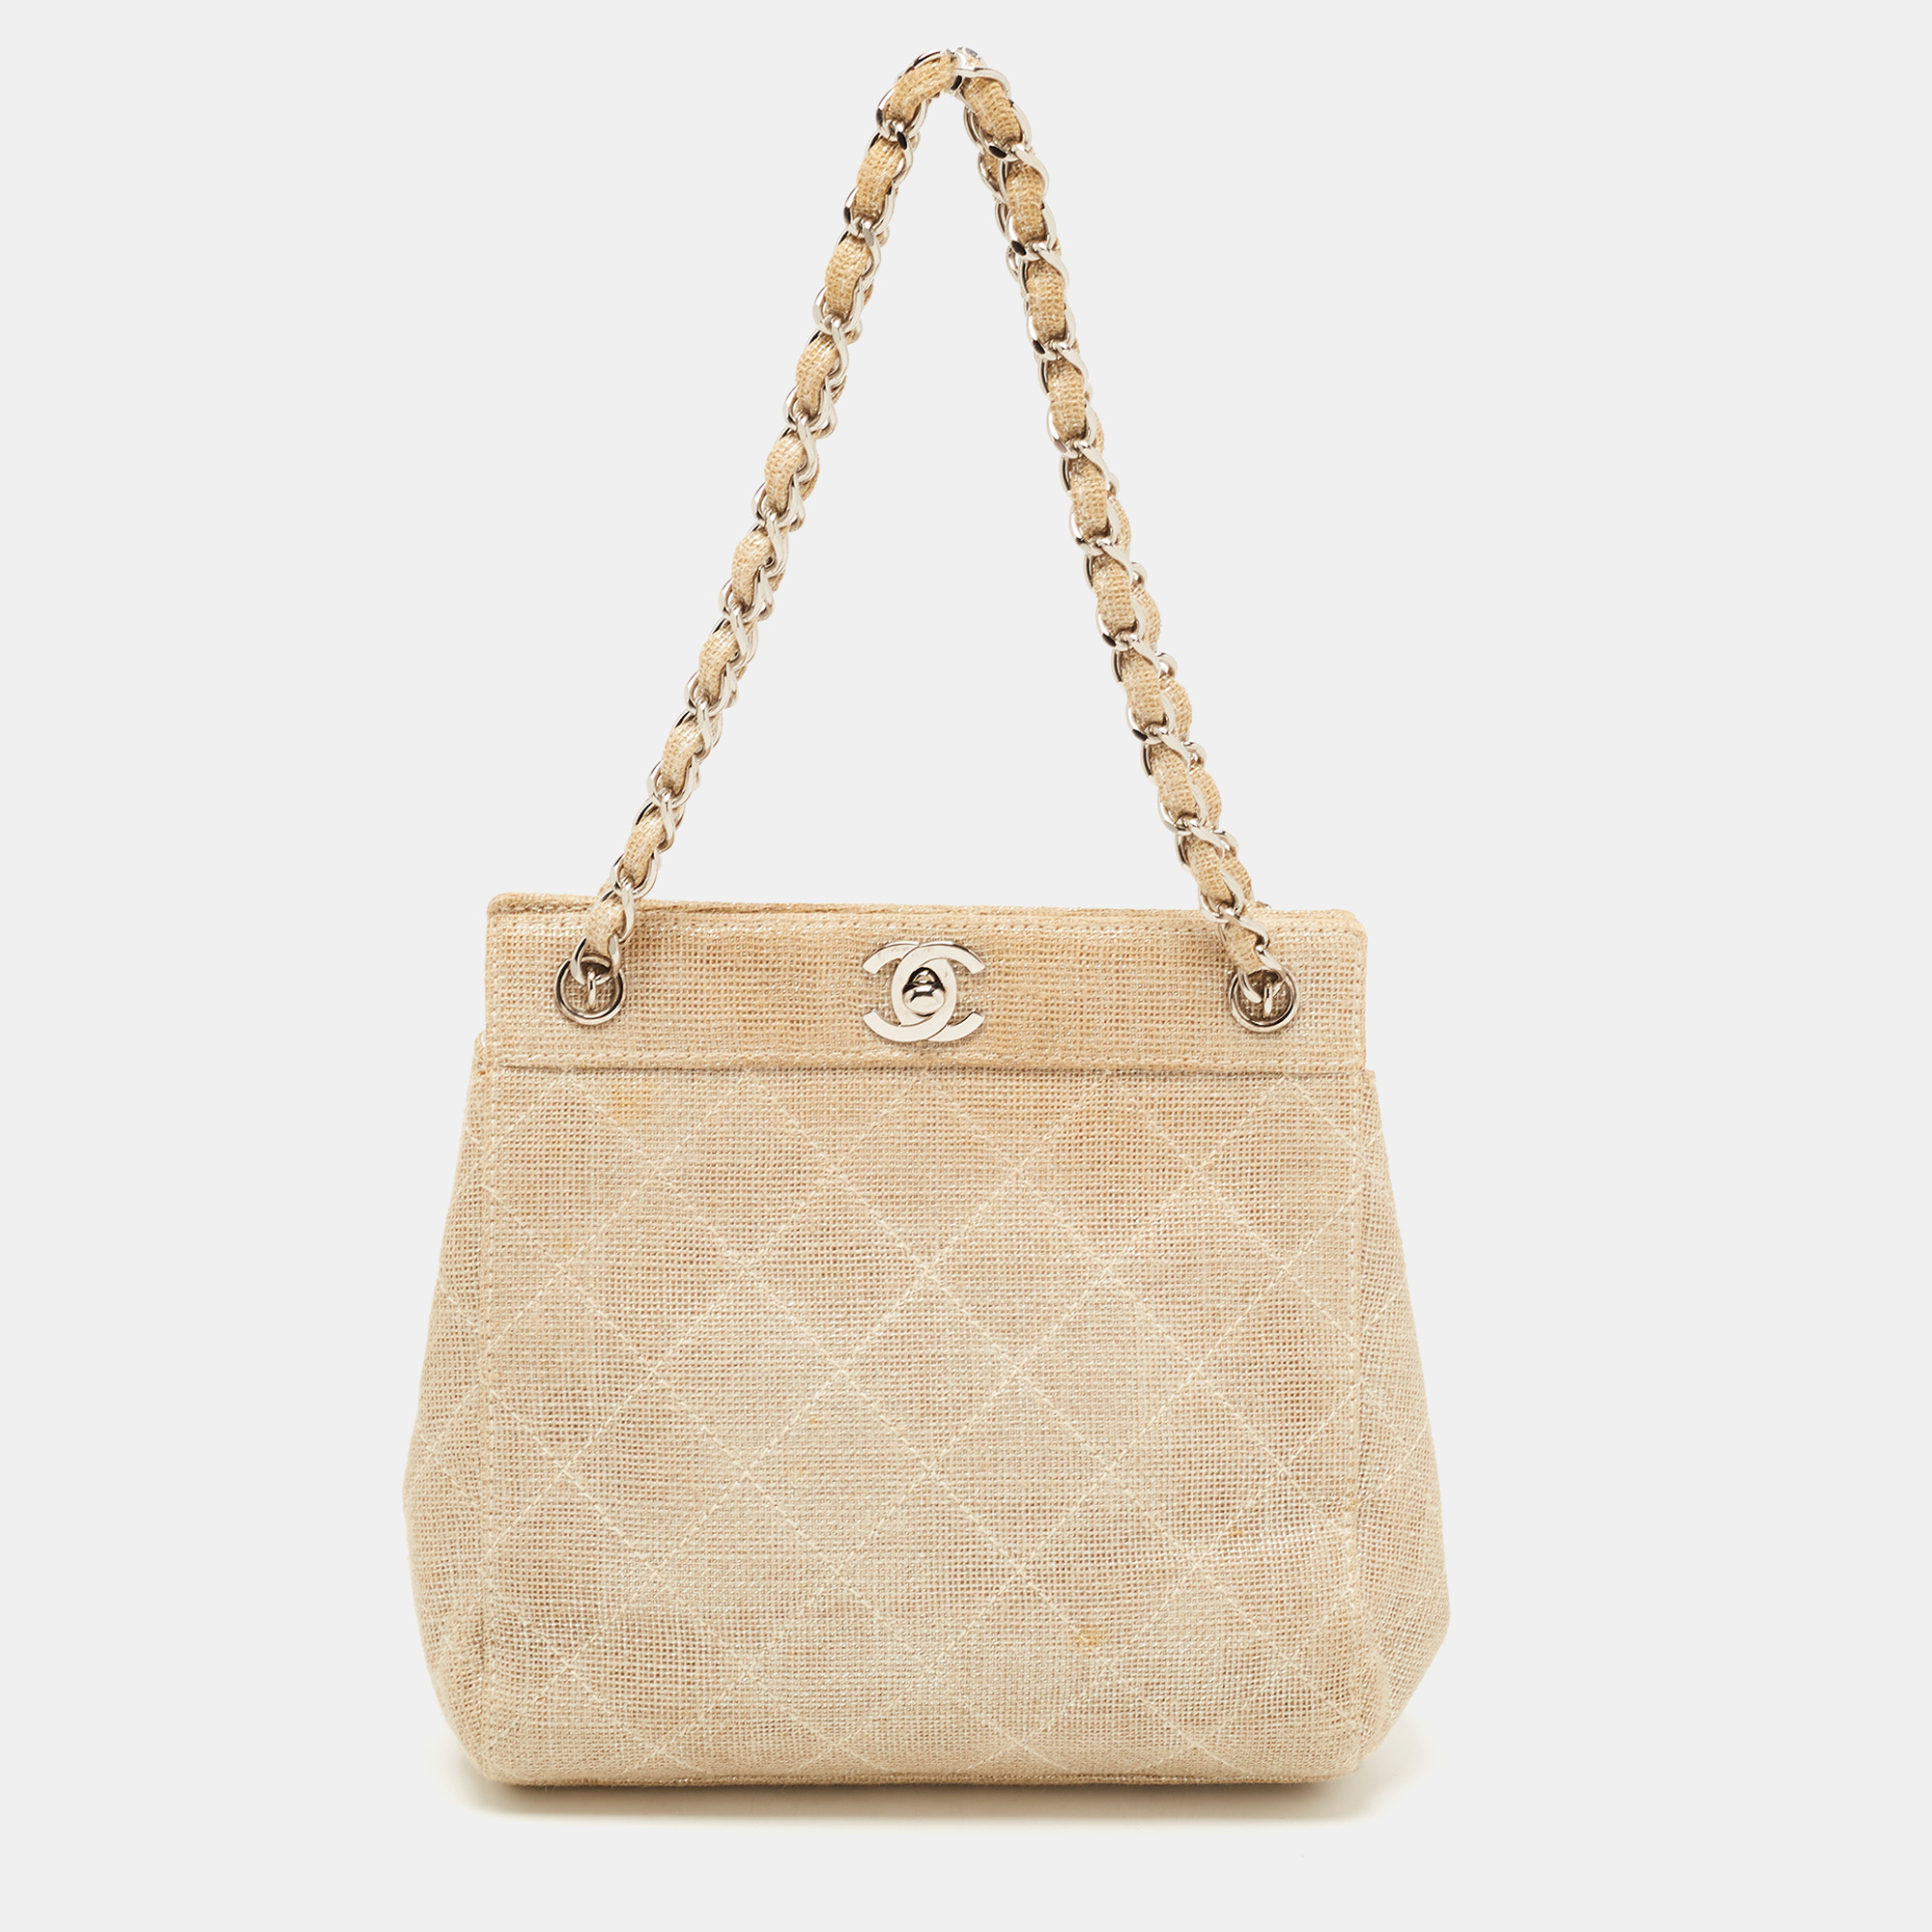 Chanel metallic beige quilted canvas mini classic chain tote